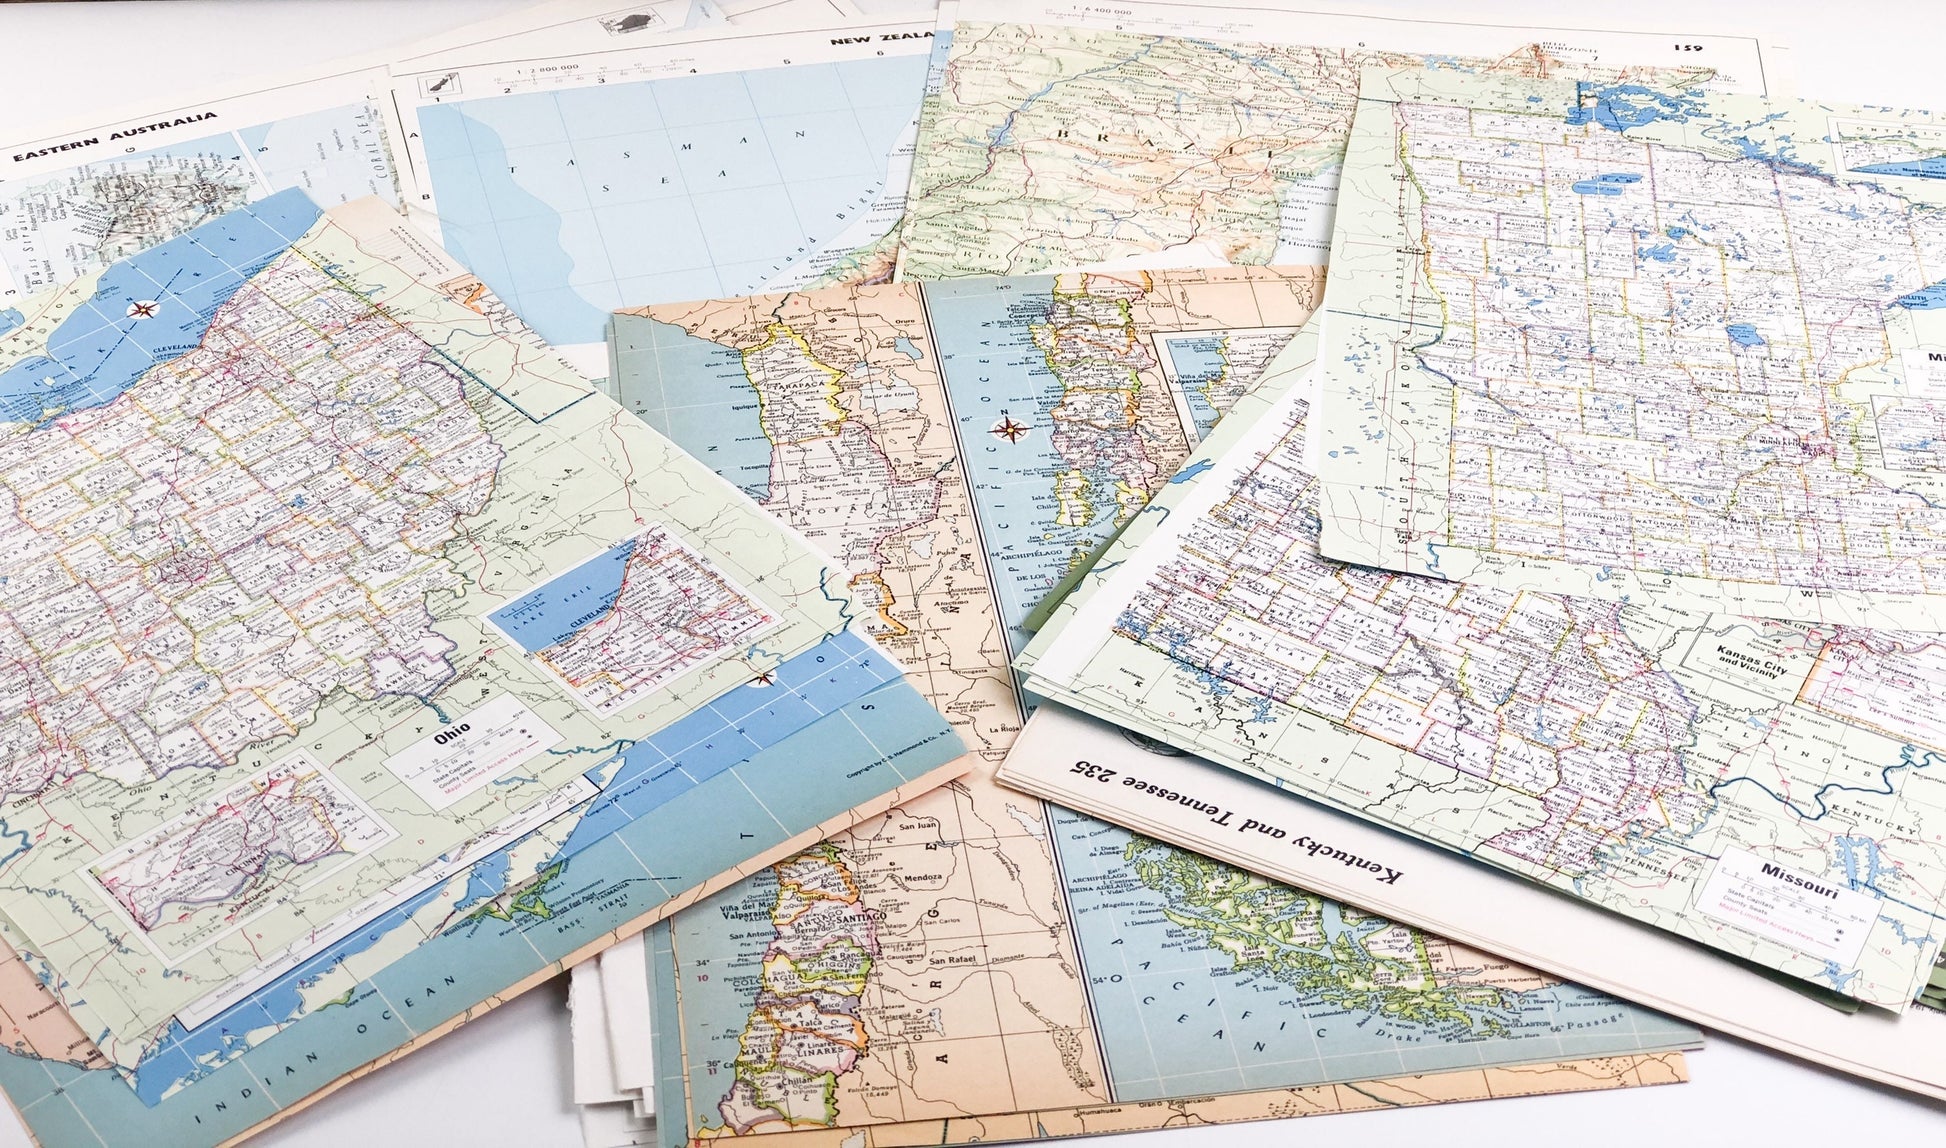 50 Vintage Maps for Crafting, Maps for Decorating